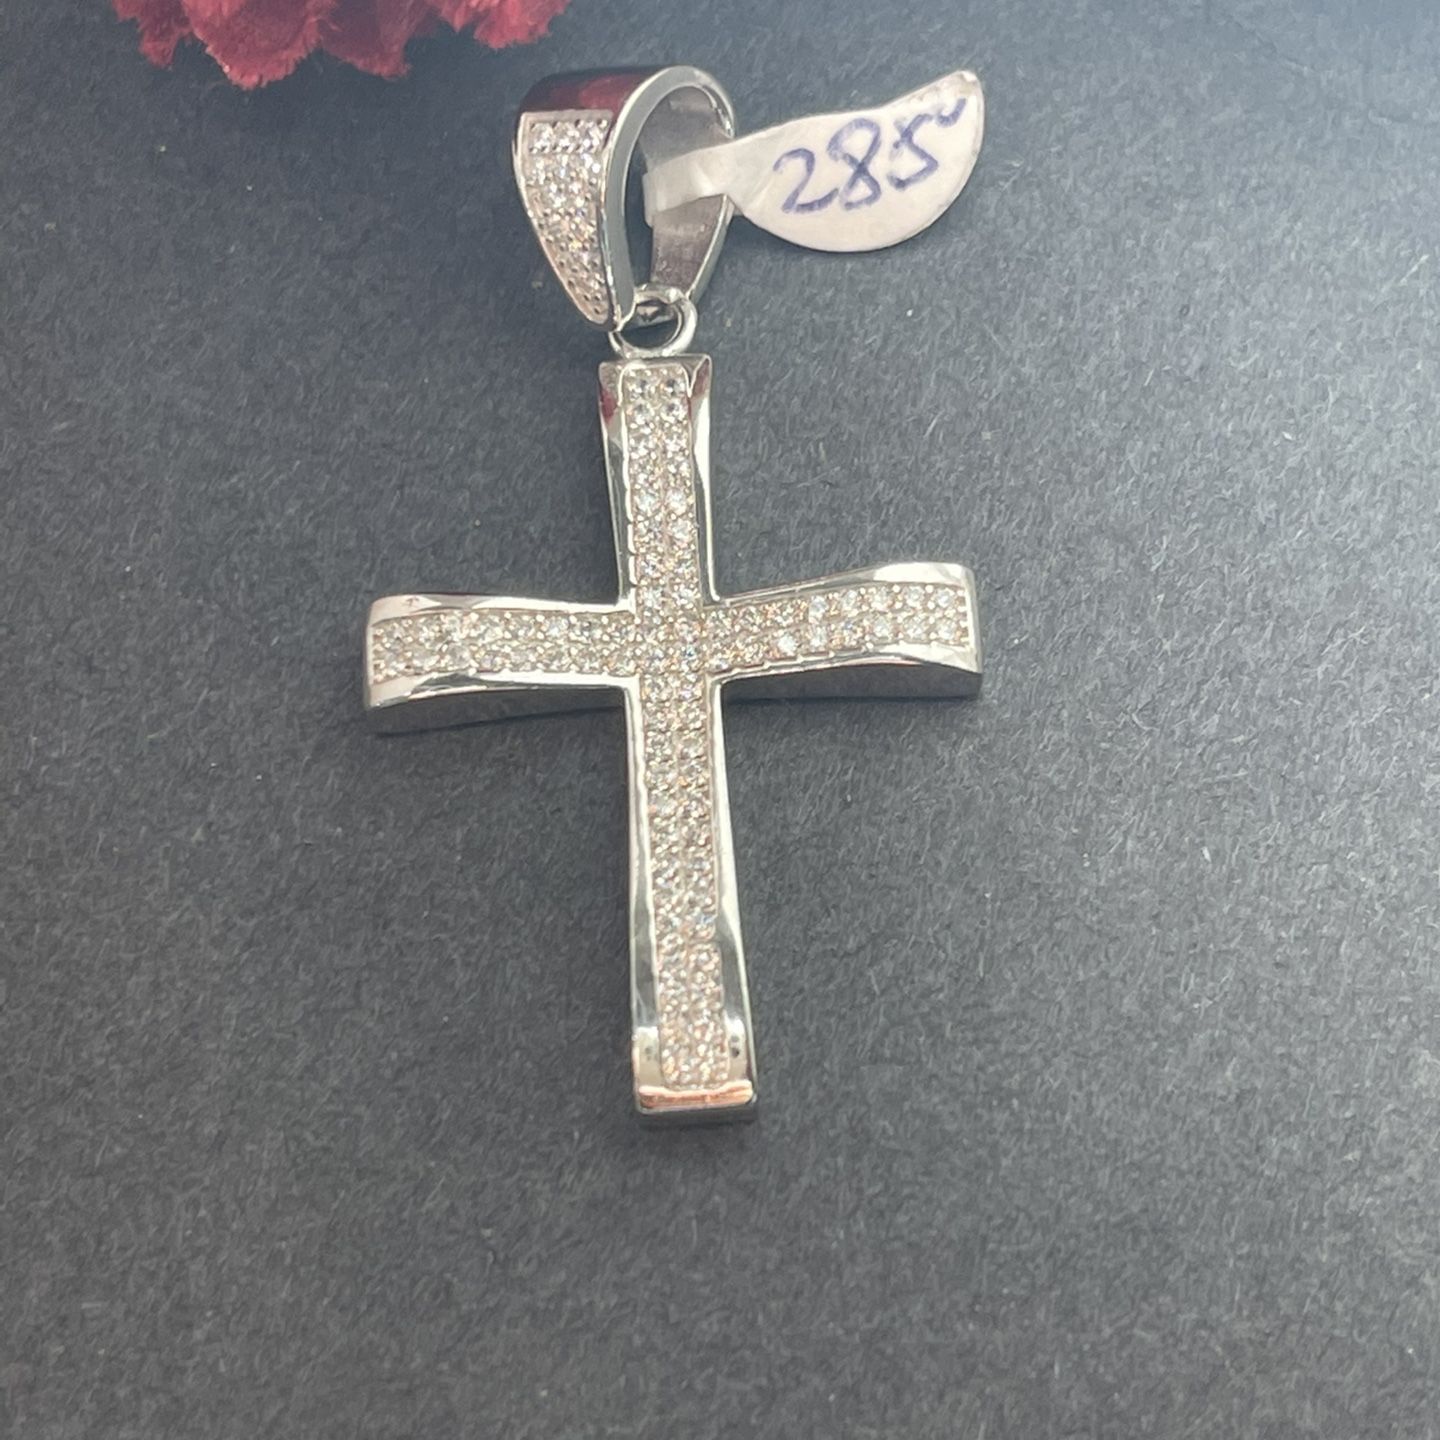 Sterling silver cross pendant stamped 925